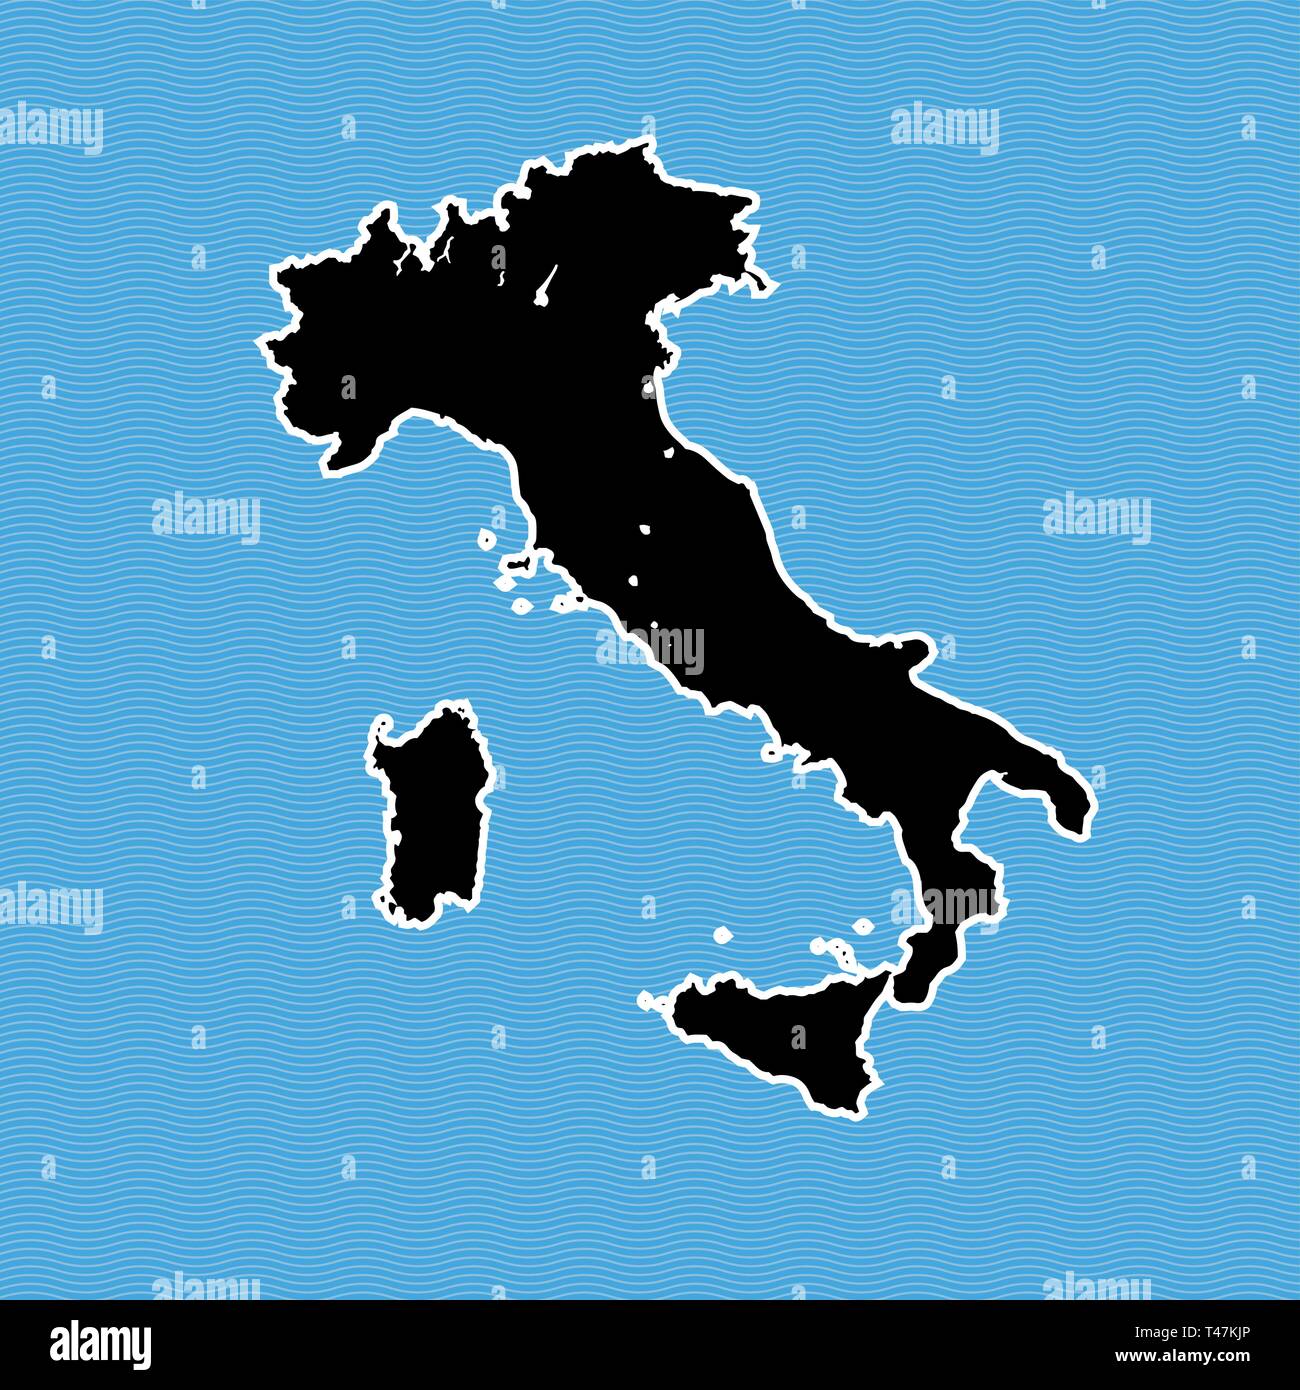 Italy map as island. Map separated on blue wave water background. Stock Vector